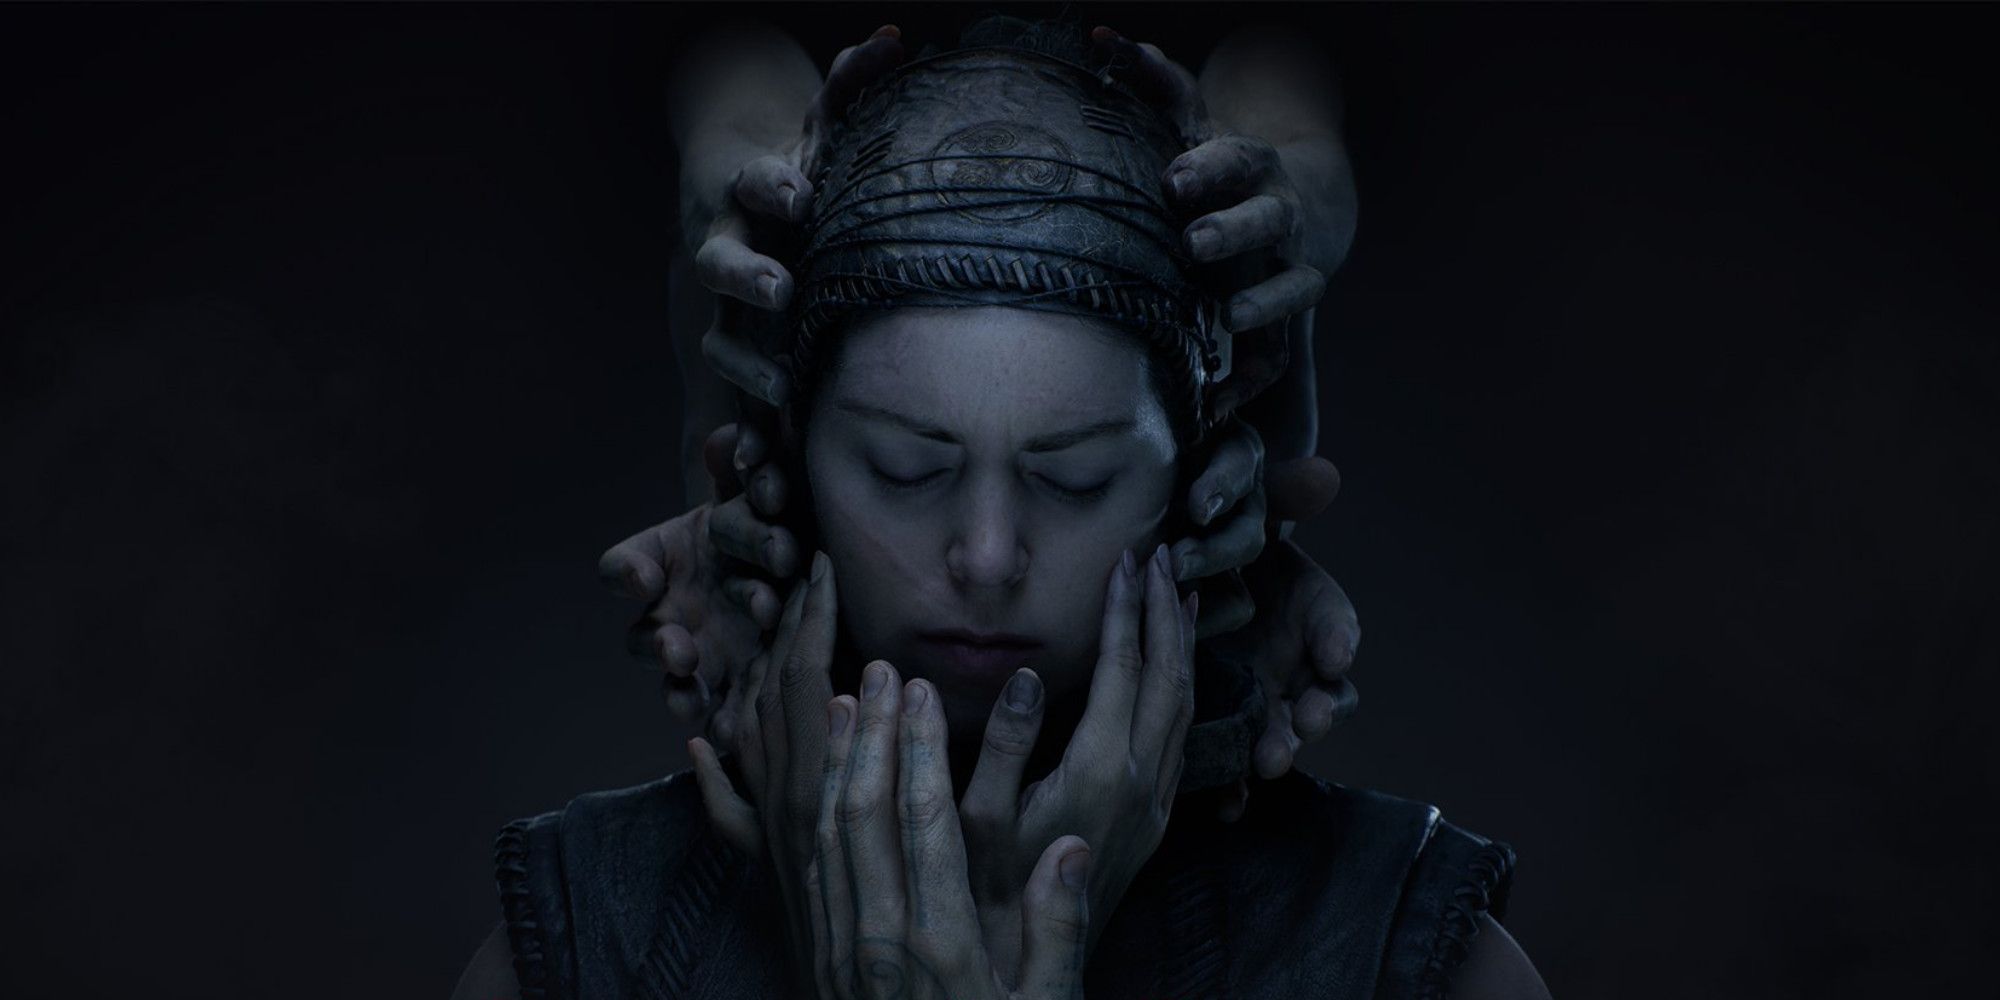 Senua with her eyes closed covered in hands in a dark misty room